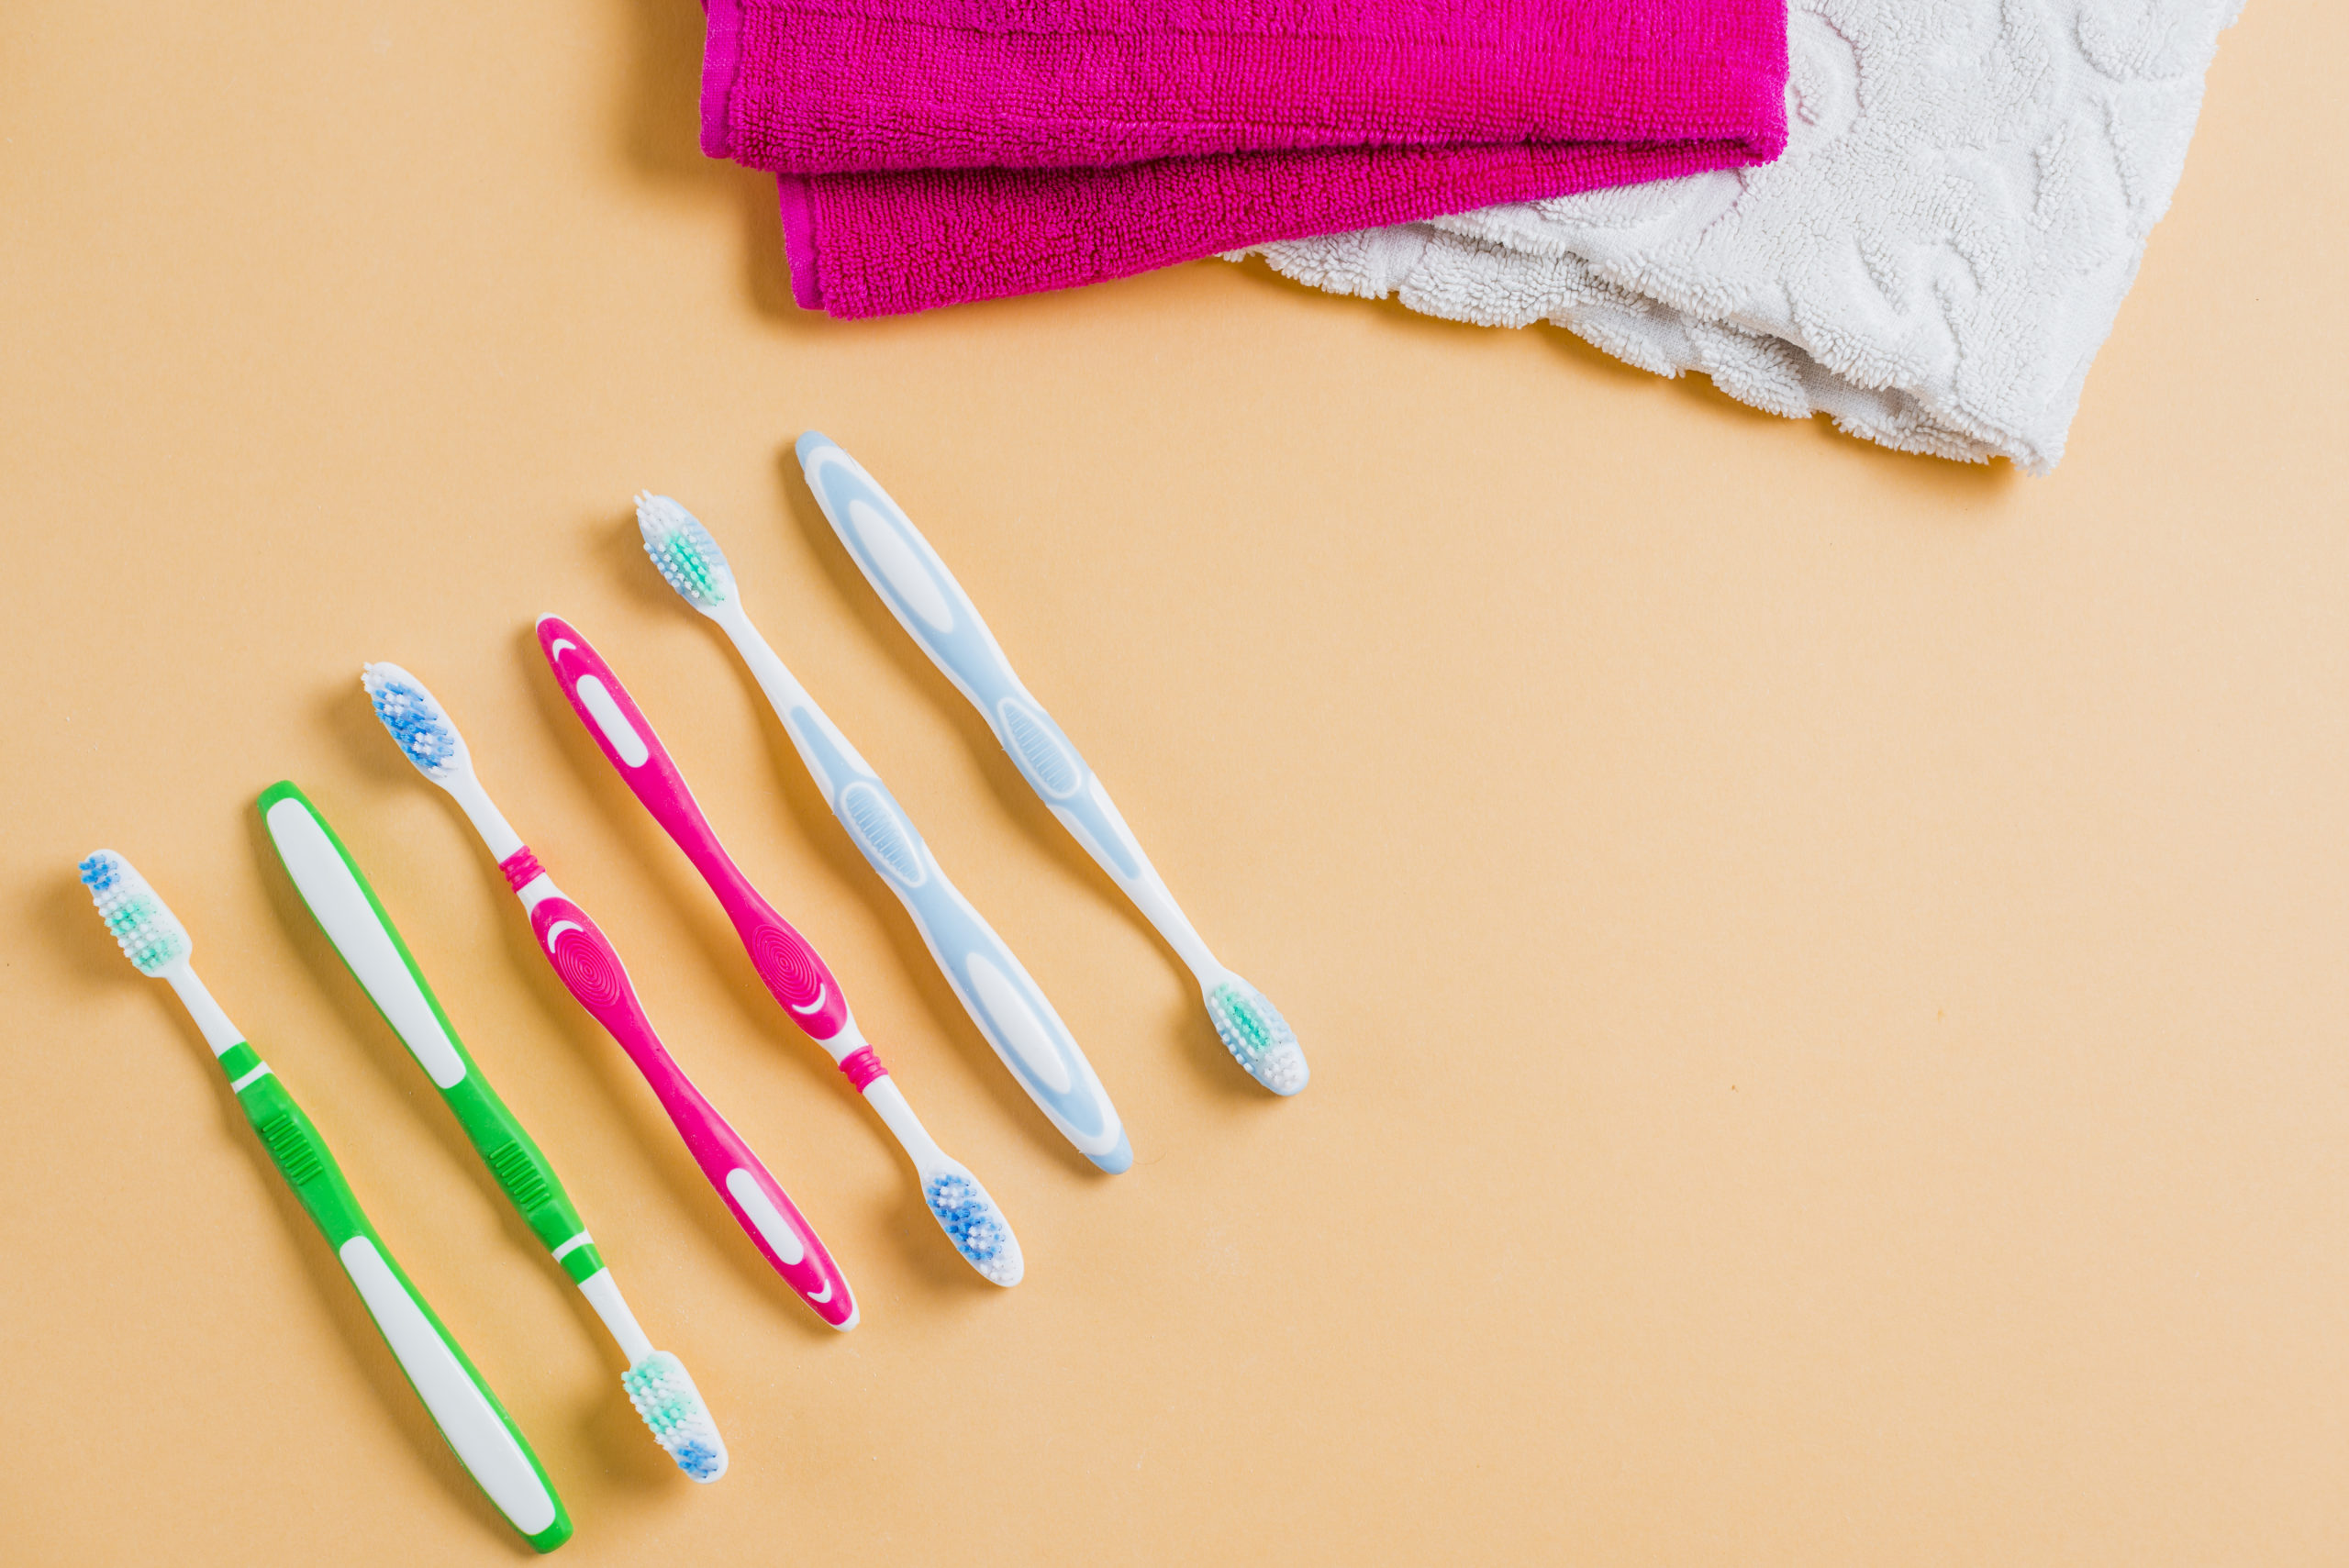 Toothbrush 101: Choosing the right brush for your teeth